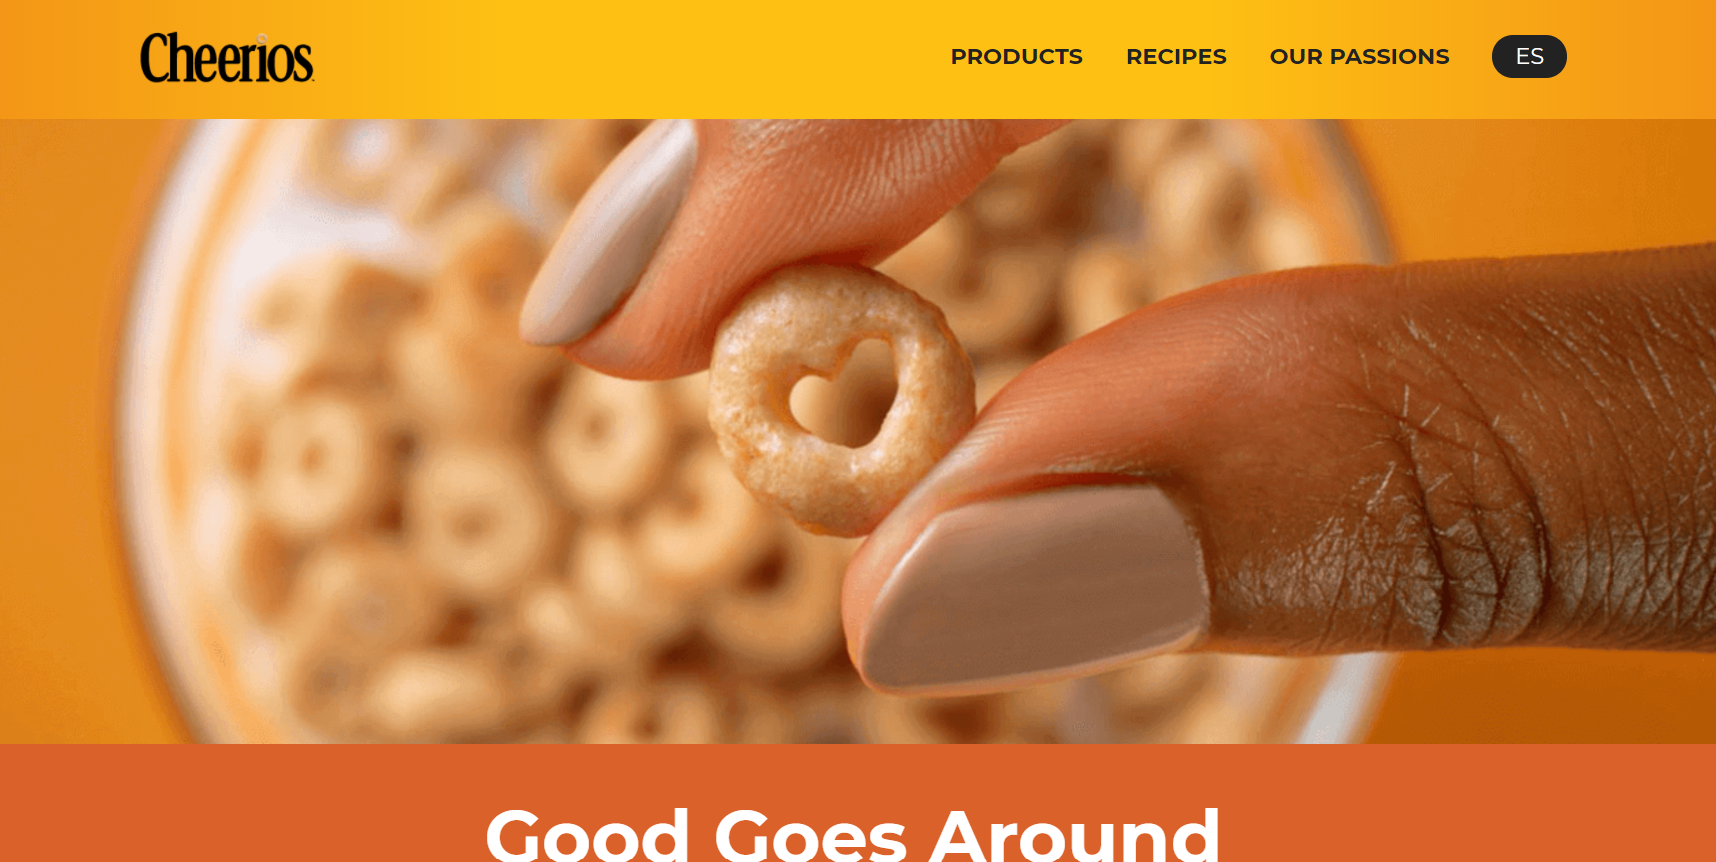 Cheerios uses gradient to tone down yellow in their web design.